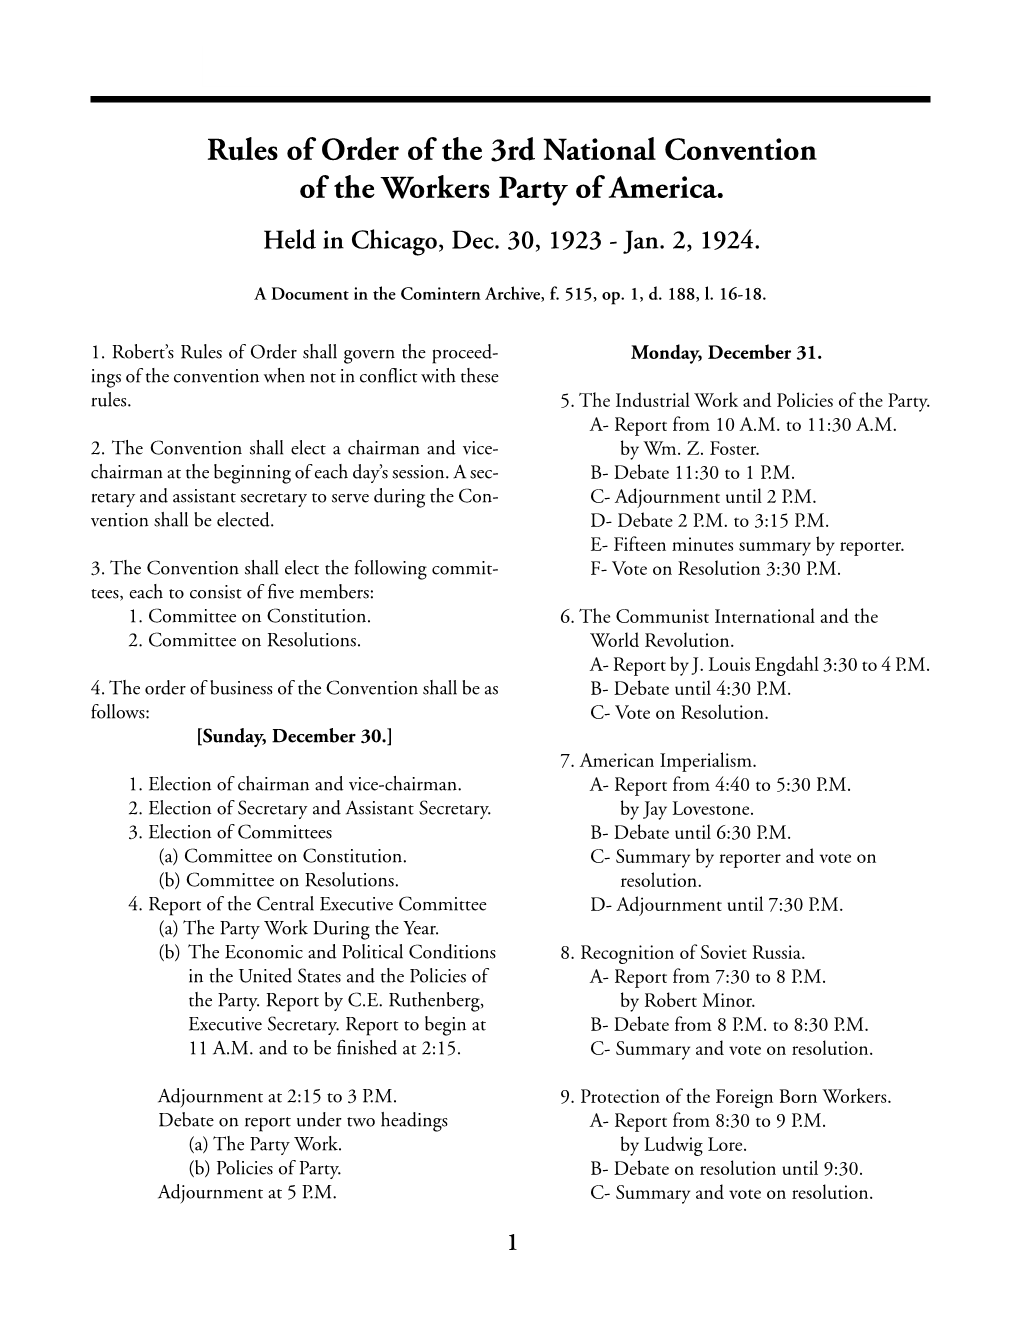 Rules of Order of the 3Rd National Convention of the Workers Party of America